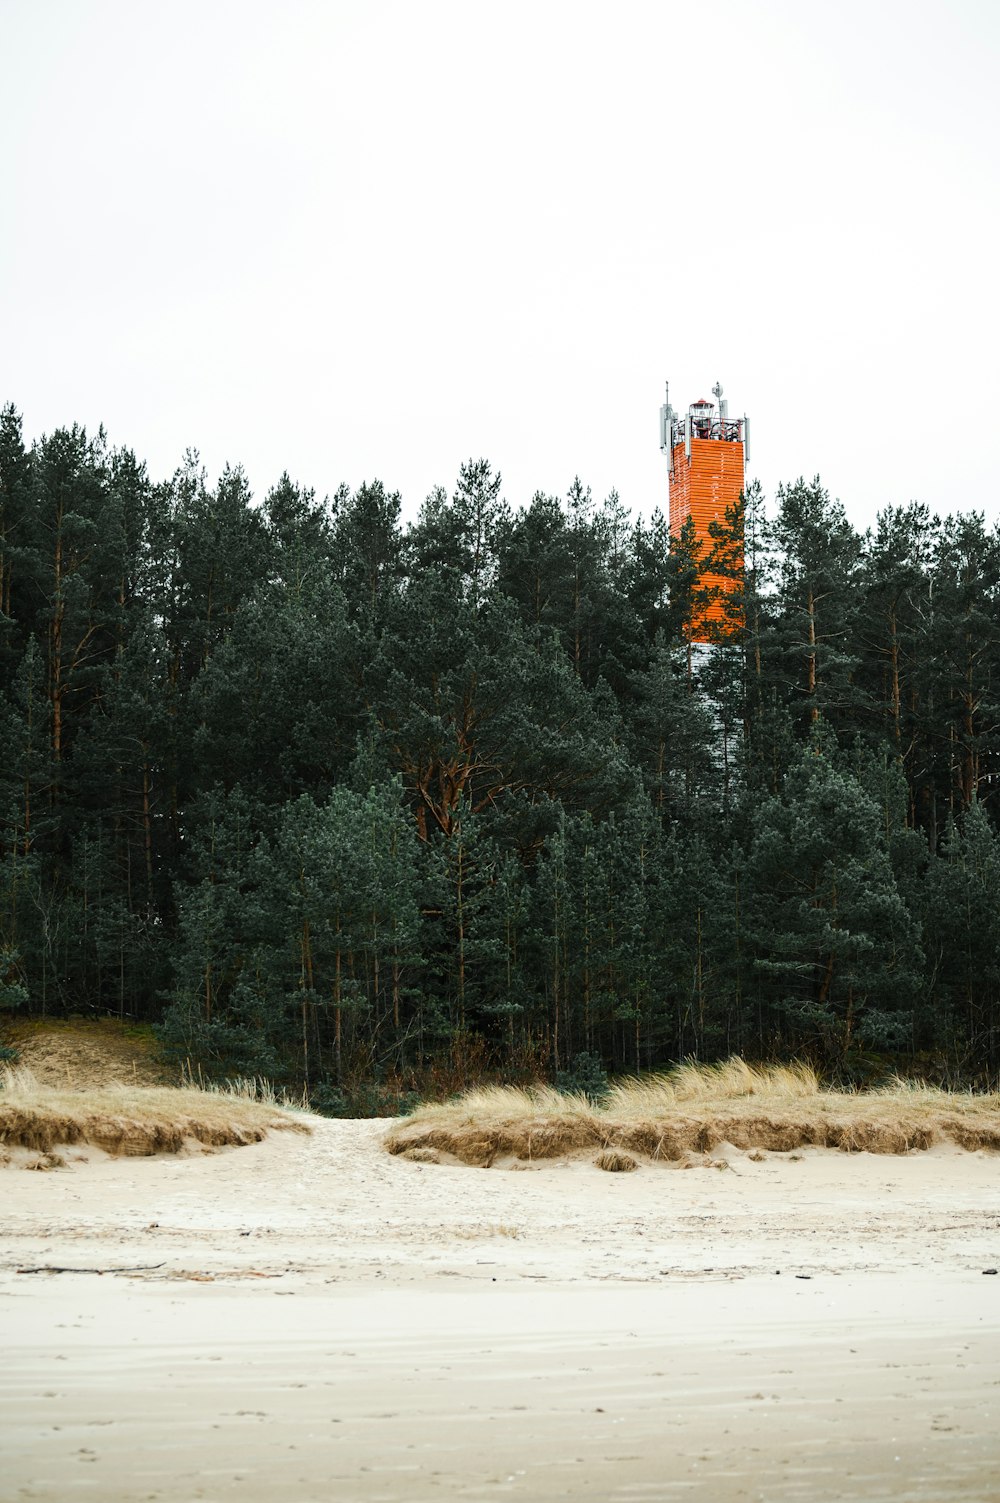 a tall tower in the middle of a forest